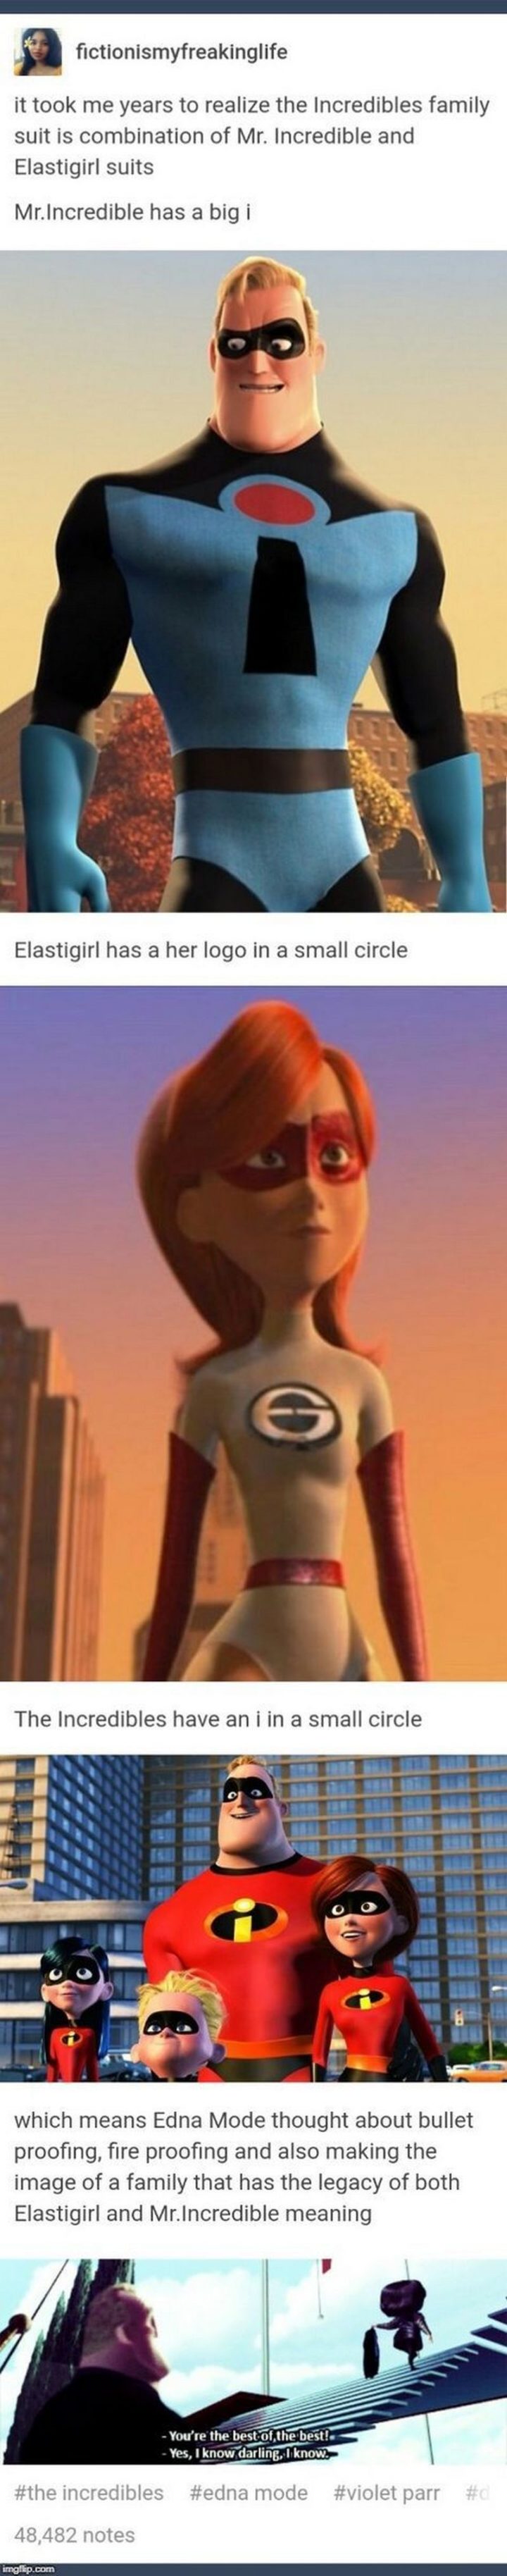 "It took me years to realize The Incredibles family suit is a combination of Mr. Incredible and Elastigirl suits. Mr. Incredible has a big I. Elastigirl has her logo in a circle. The Incredibles have an I in a circle. Which means, Edna Mode thought about bulletproofing, fireproofing, and also making the image of a family that has the legacy of both Elastigirl and Mr. Incredible meaning. You're the best of the best! Yes, I know darling, I know."